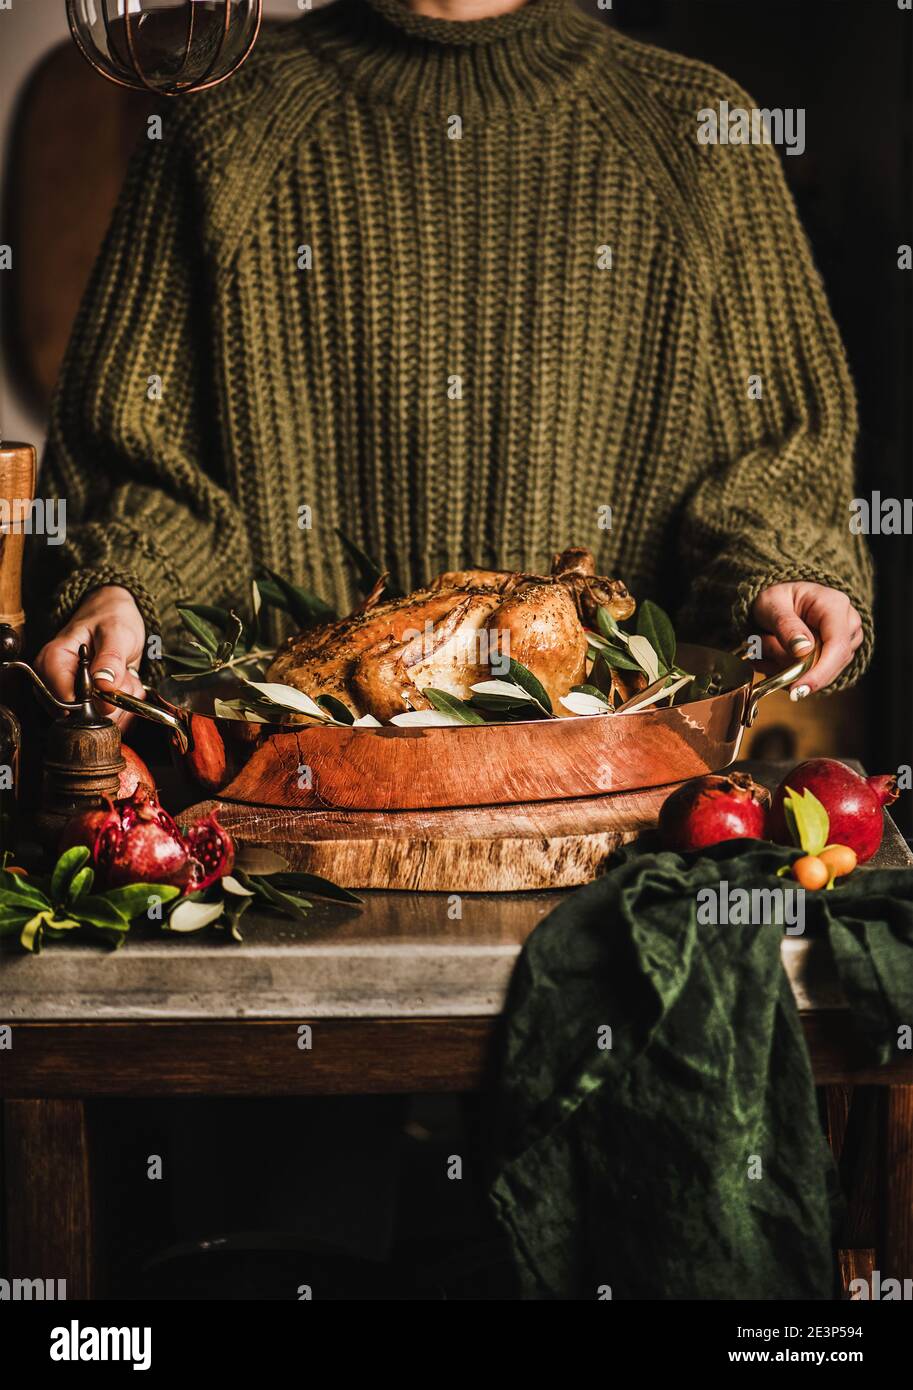 Female in knitted sweater holding whole roasted chicken for winter holiday festive dinner in copper roasting tin with spices, herbs and fresh fruit. Christmas or Thanksgiving Day cooking concept Stock Photo